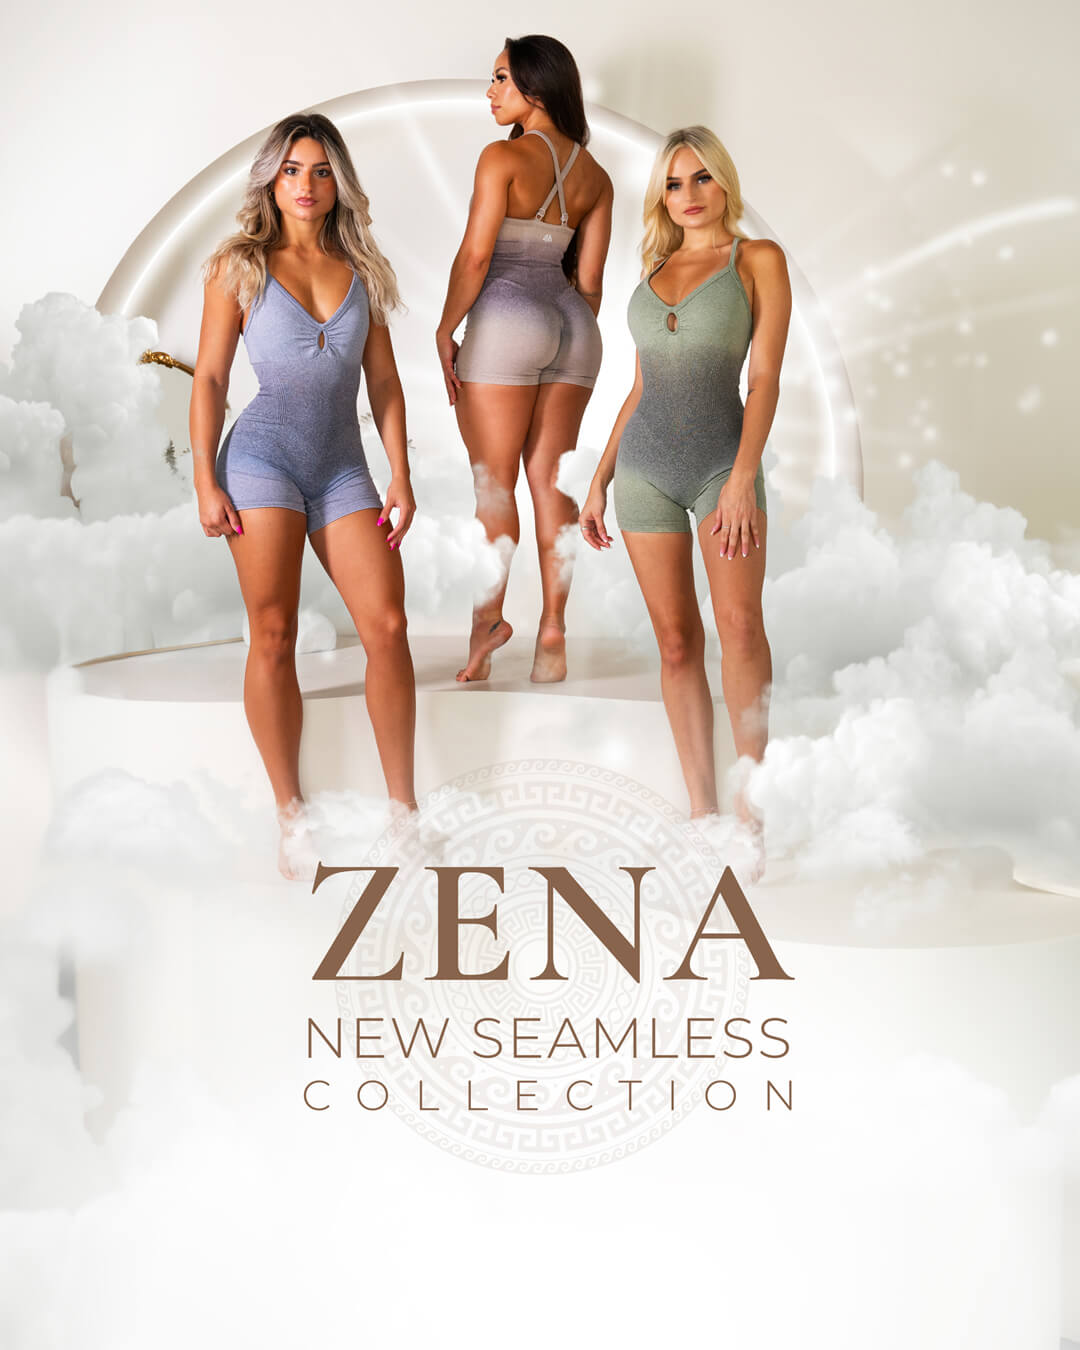 ZENA New Seamless Collection